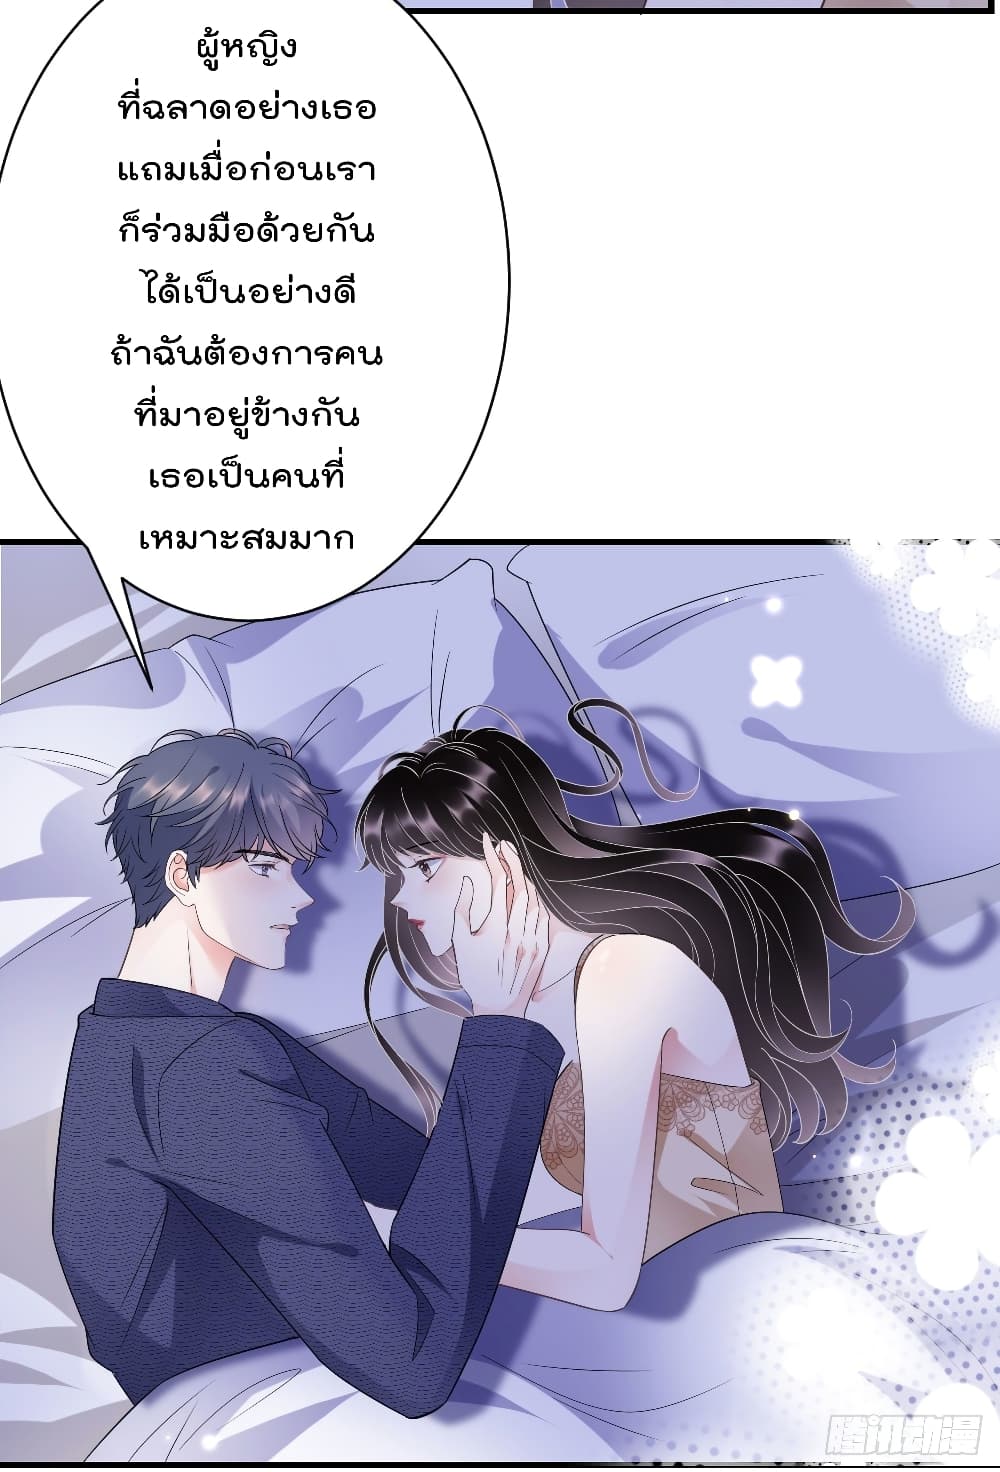 What Can the Eldest Lady Have คุณหนูใหญ่ ทำไมคุณร้ายอย่างนี้ 20-20